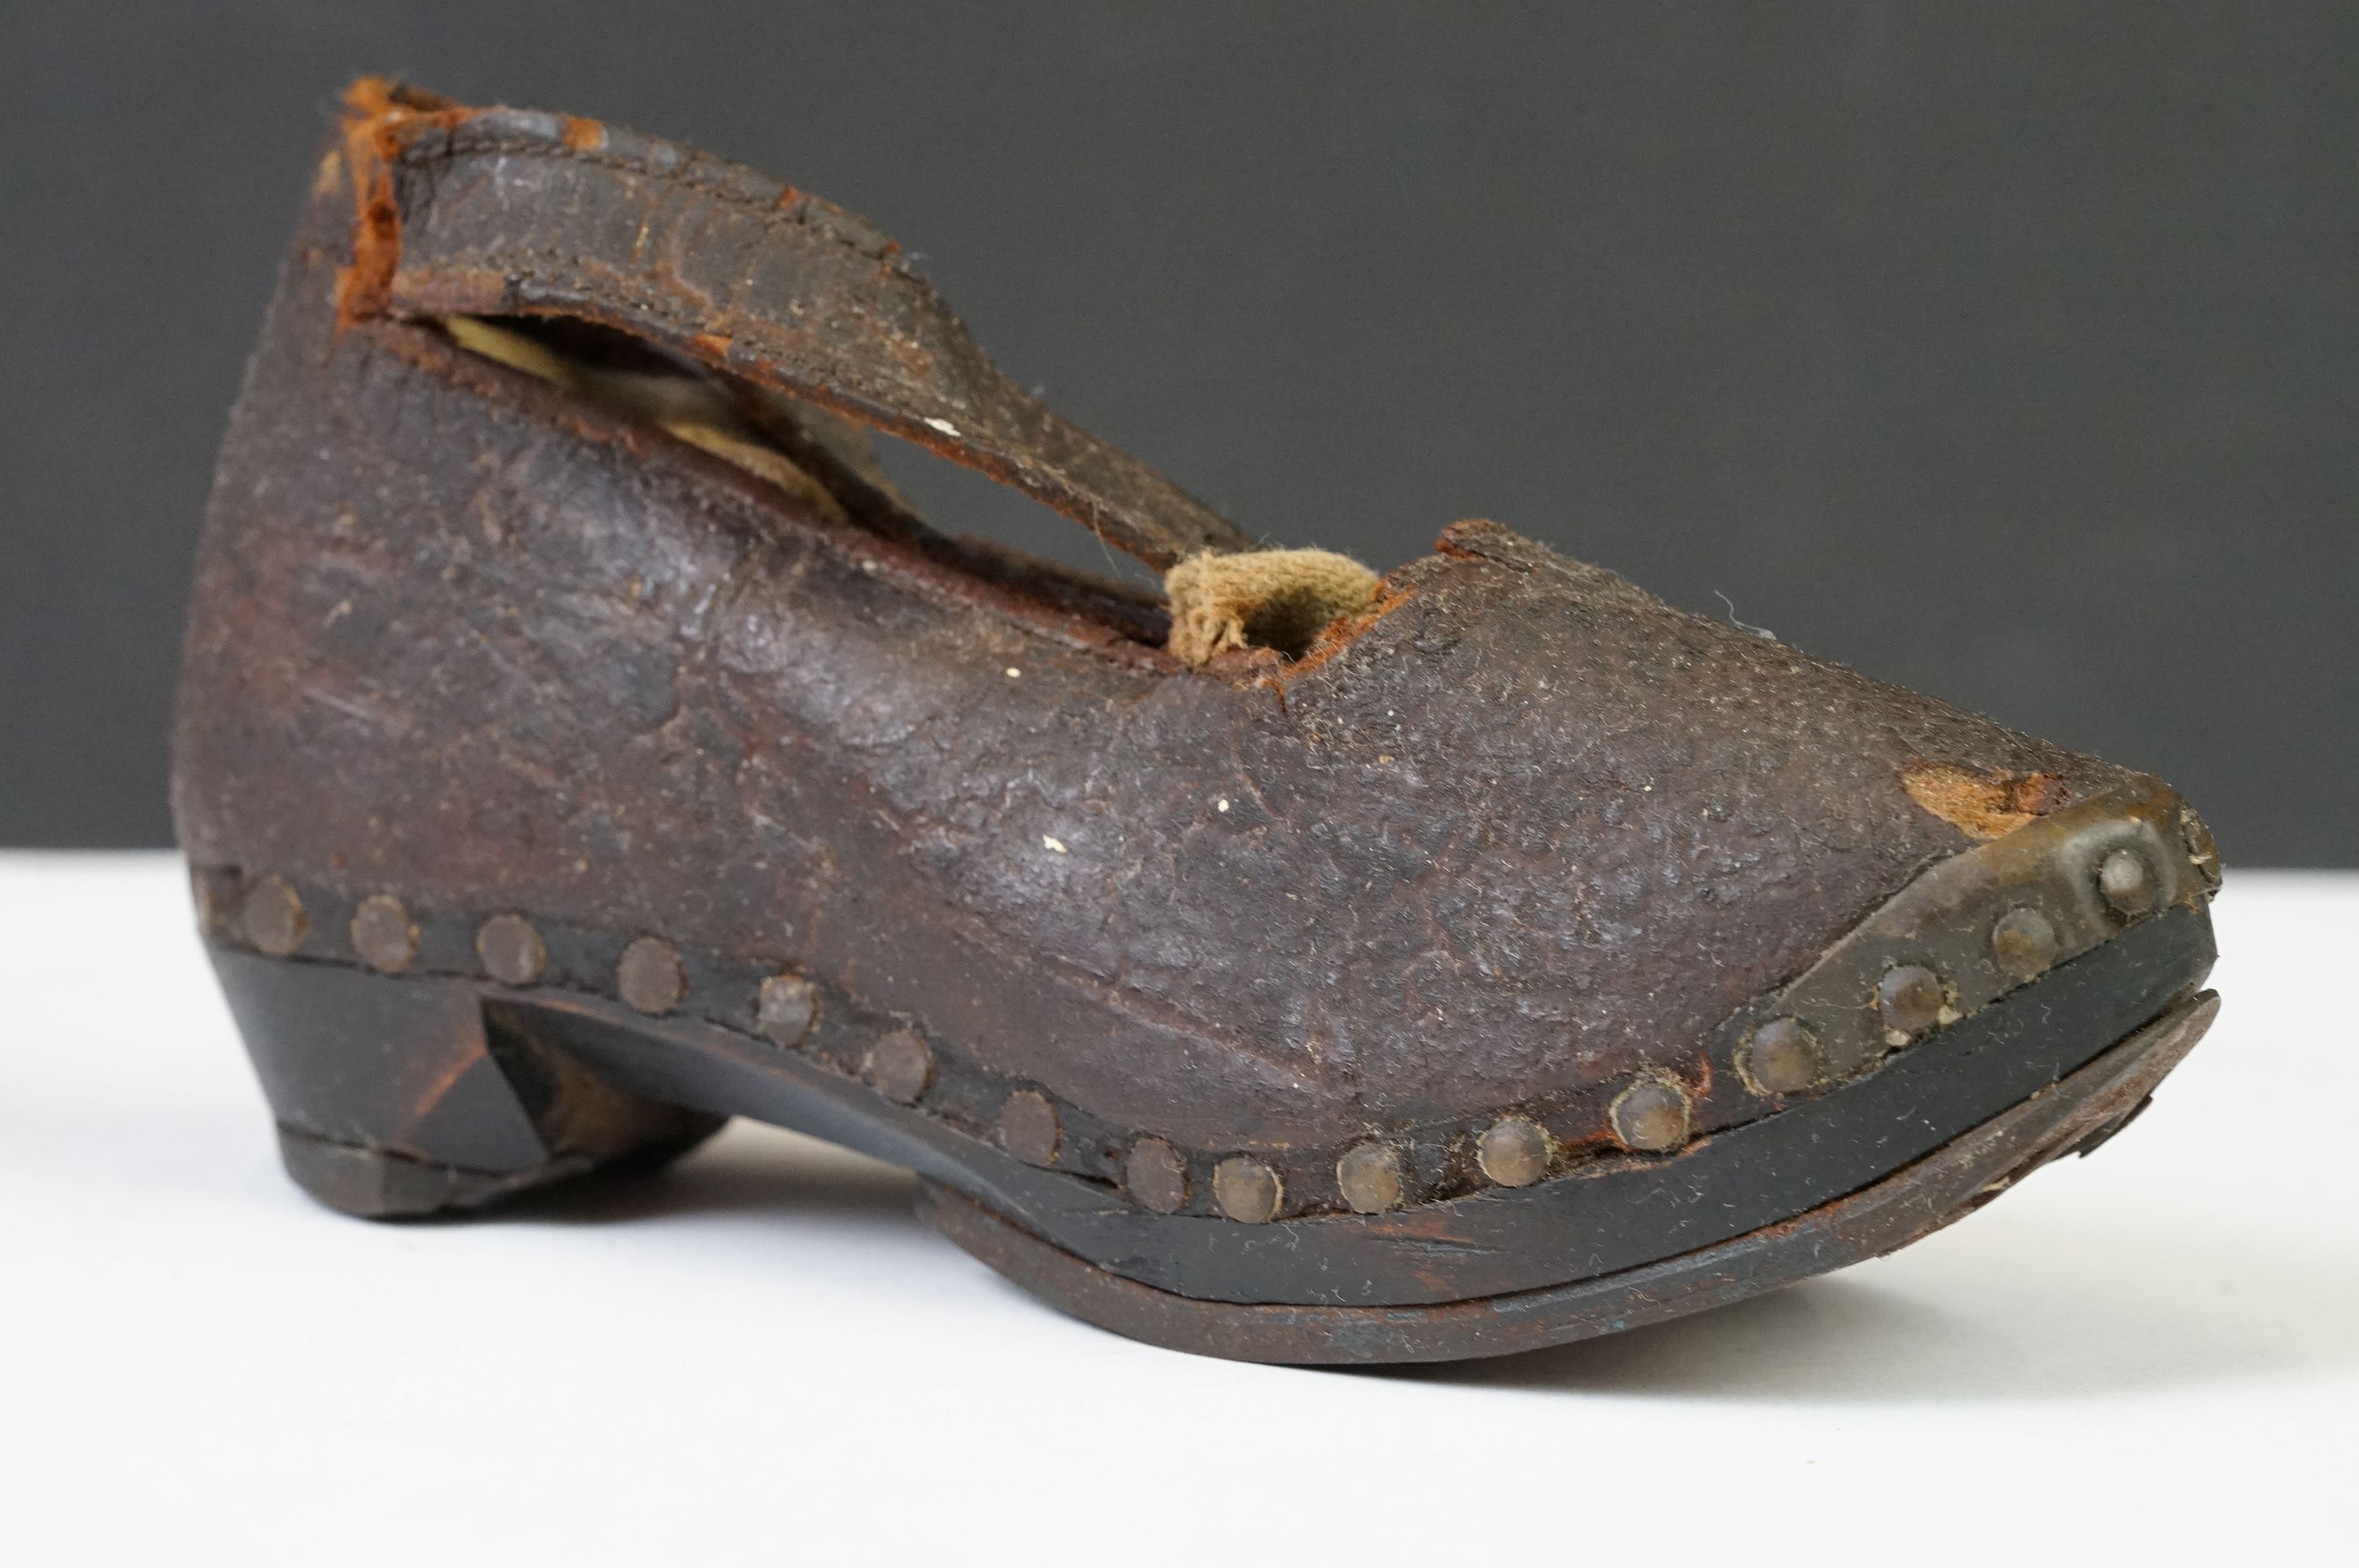 A pair of 'Latchet' leather Childs shoes c.1650-1700 - Image 8 of 10